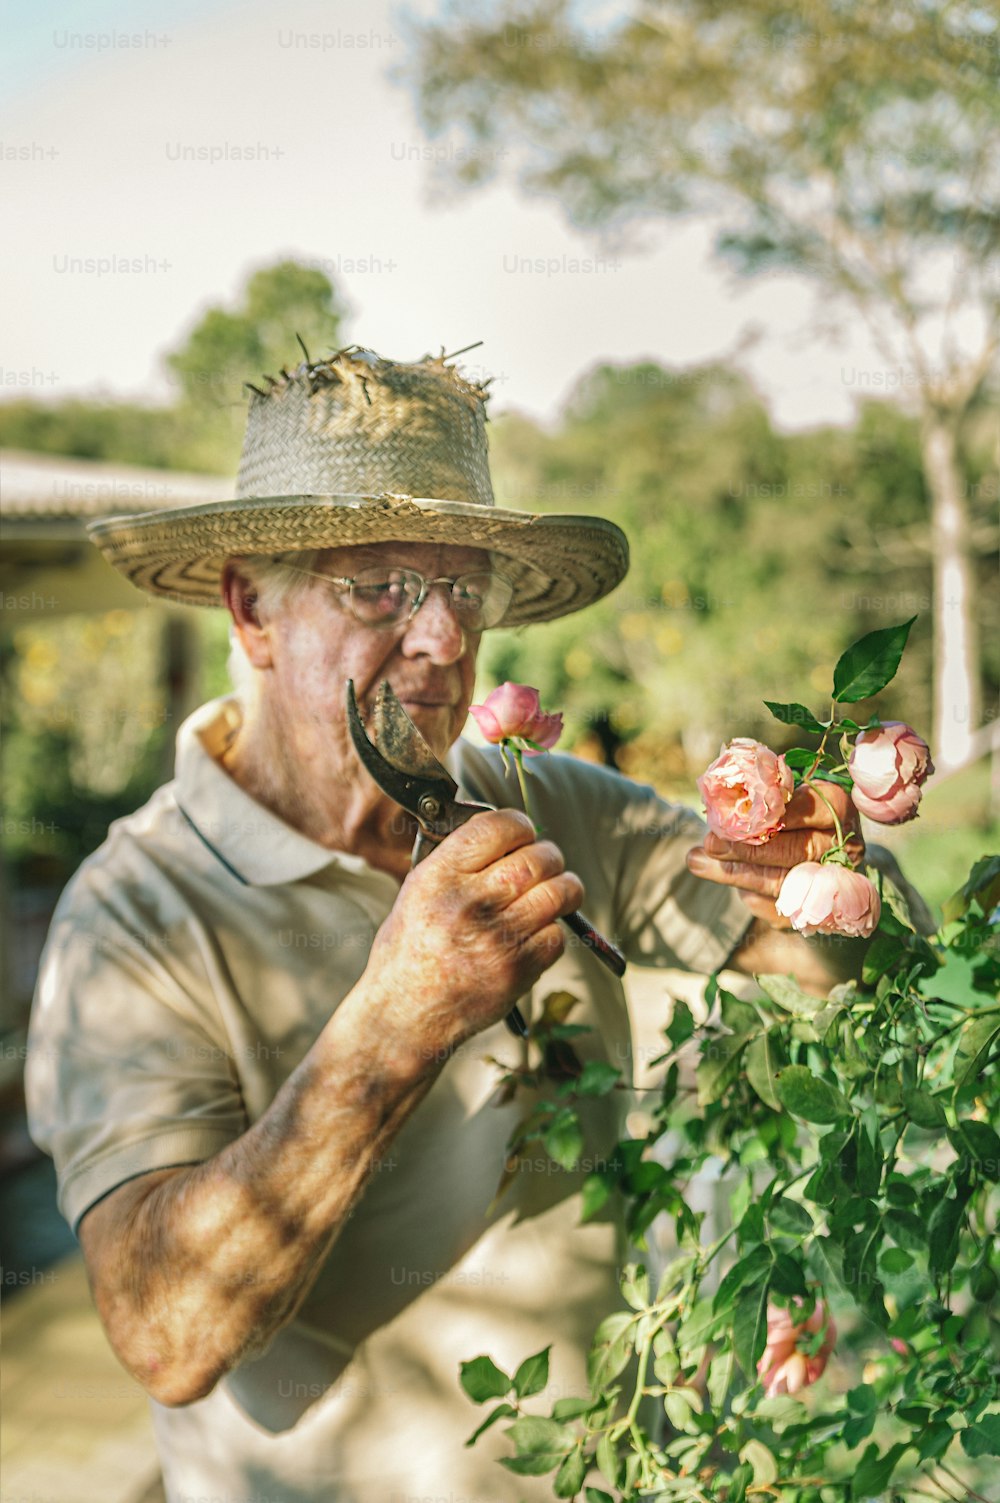 a man in a straw hat is trimming a rose bush